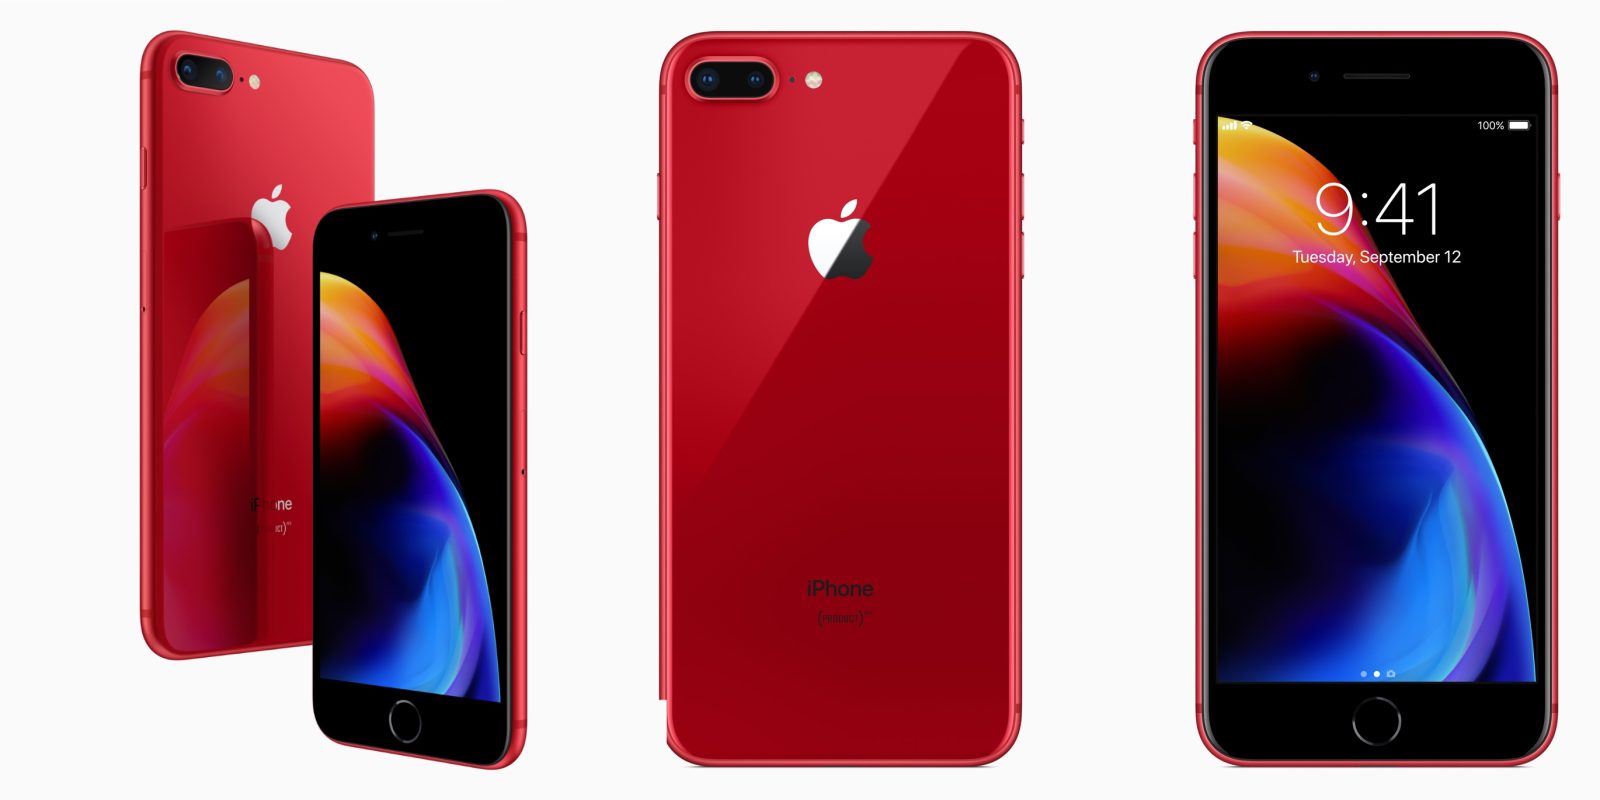 Tab to read which model of iPhones in China will have red colour